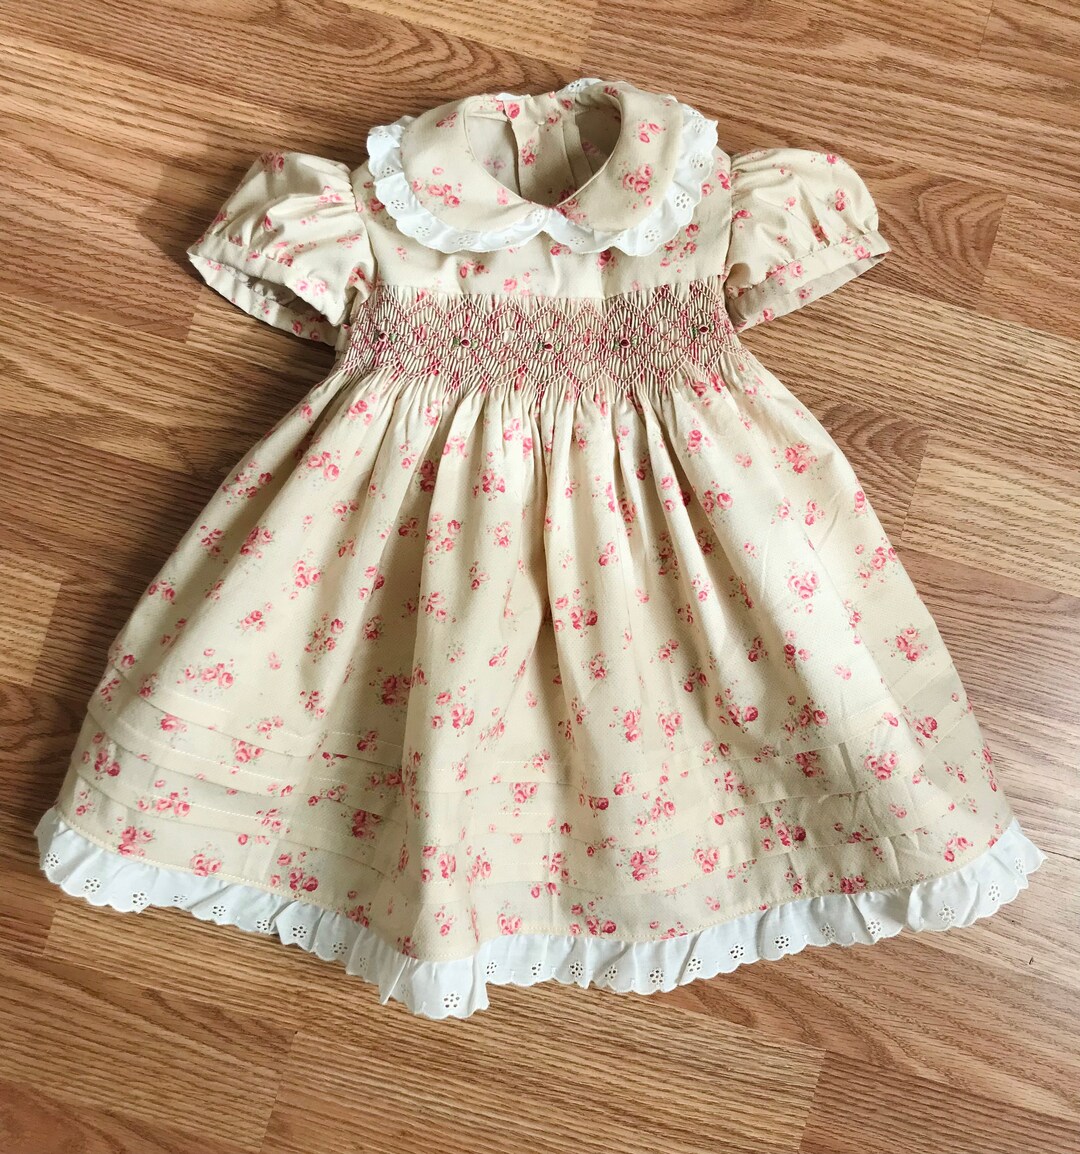 Vintage Look Hand Smocked Lacy Floral Cotton Dress for Baby - Etsy